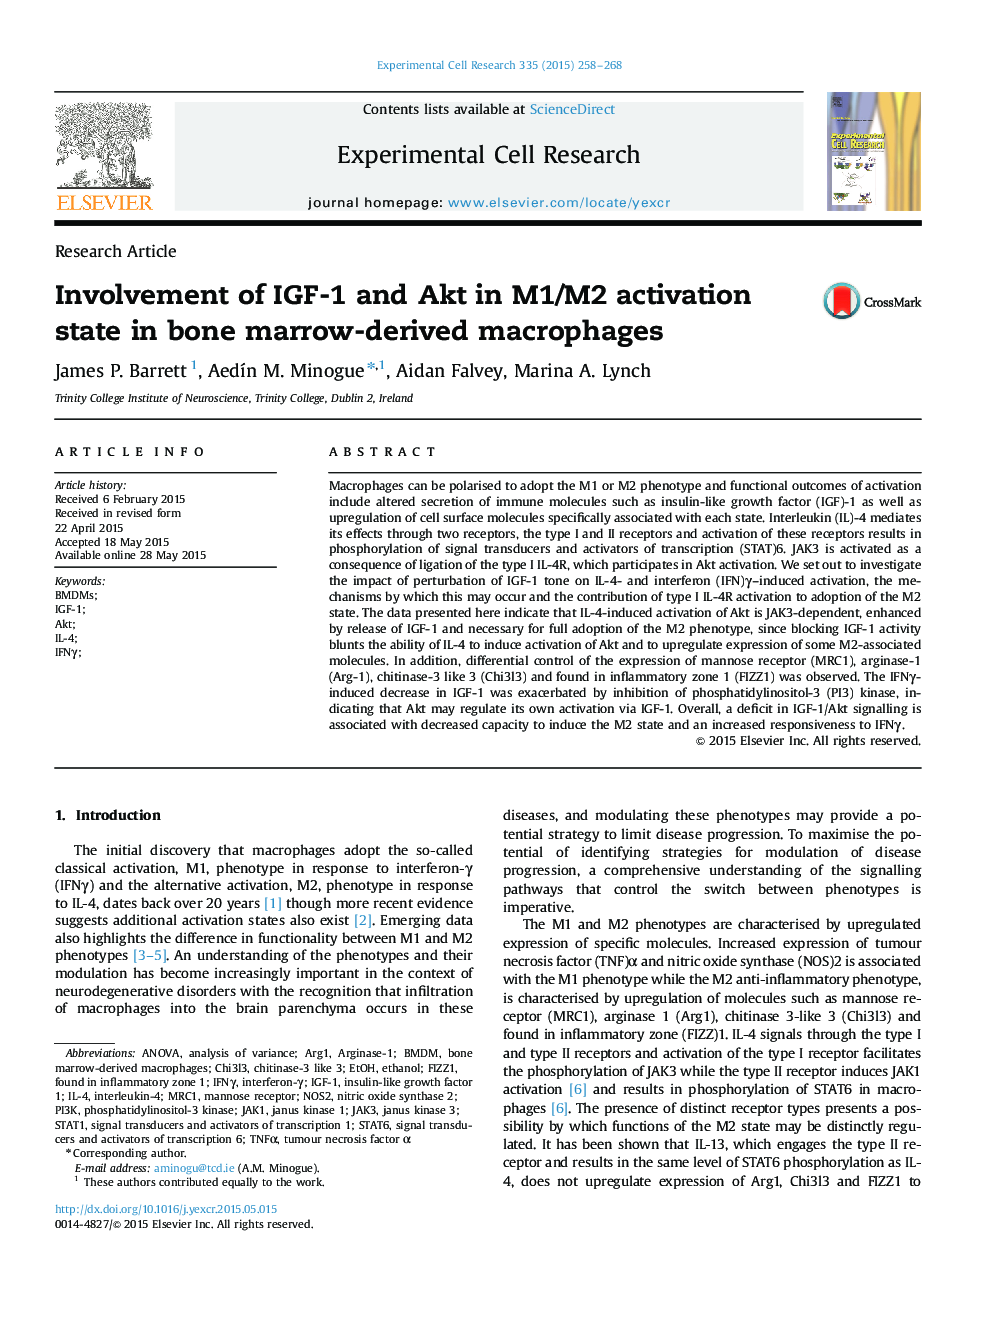 Involvement of IGF-1 and Akt in M1/M2 activation state in bone marrow-derived macrophages